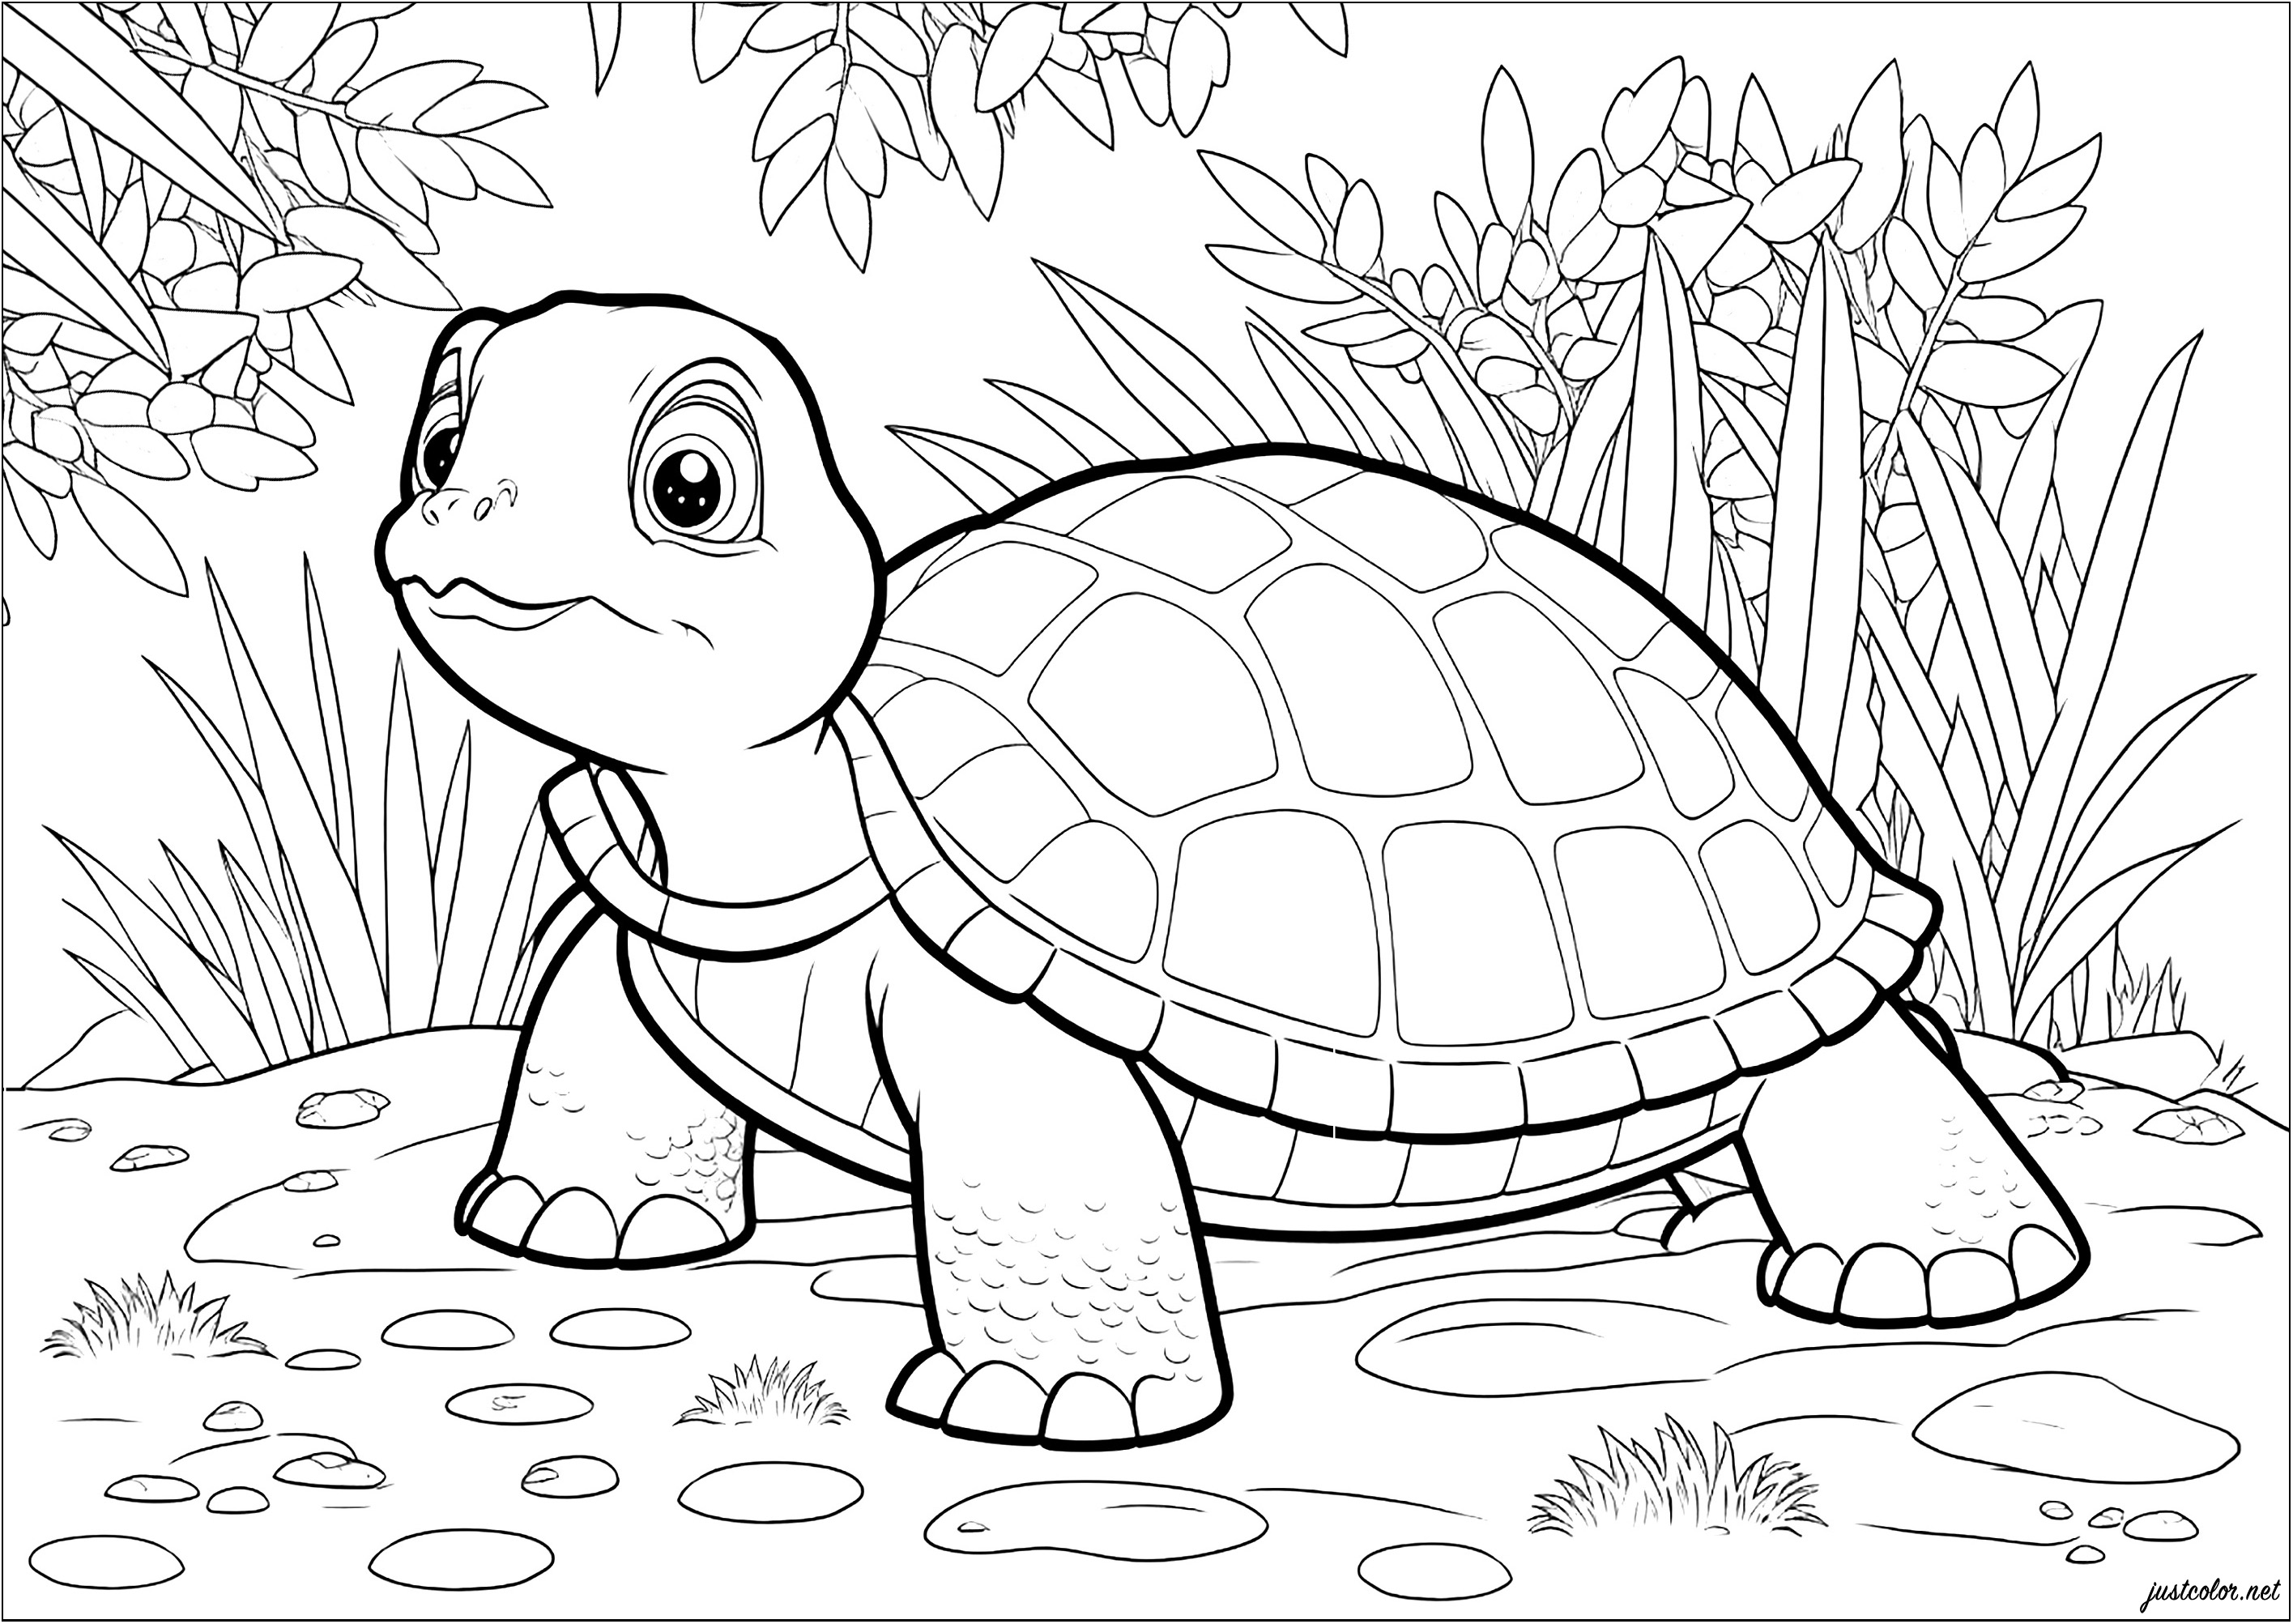 Pretty coloring of a turtle in its natural environment. Observe the turtle's determination as it makes slow progress towards its goal.